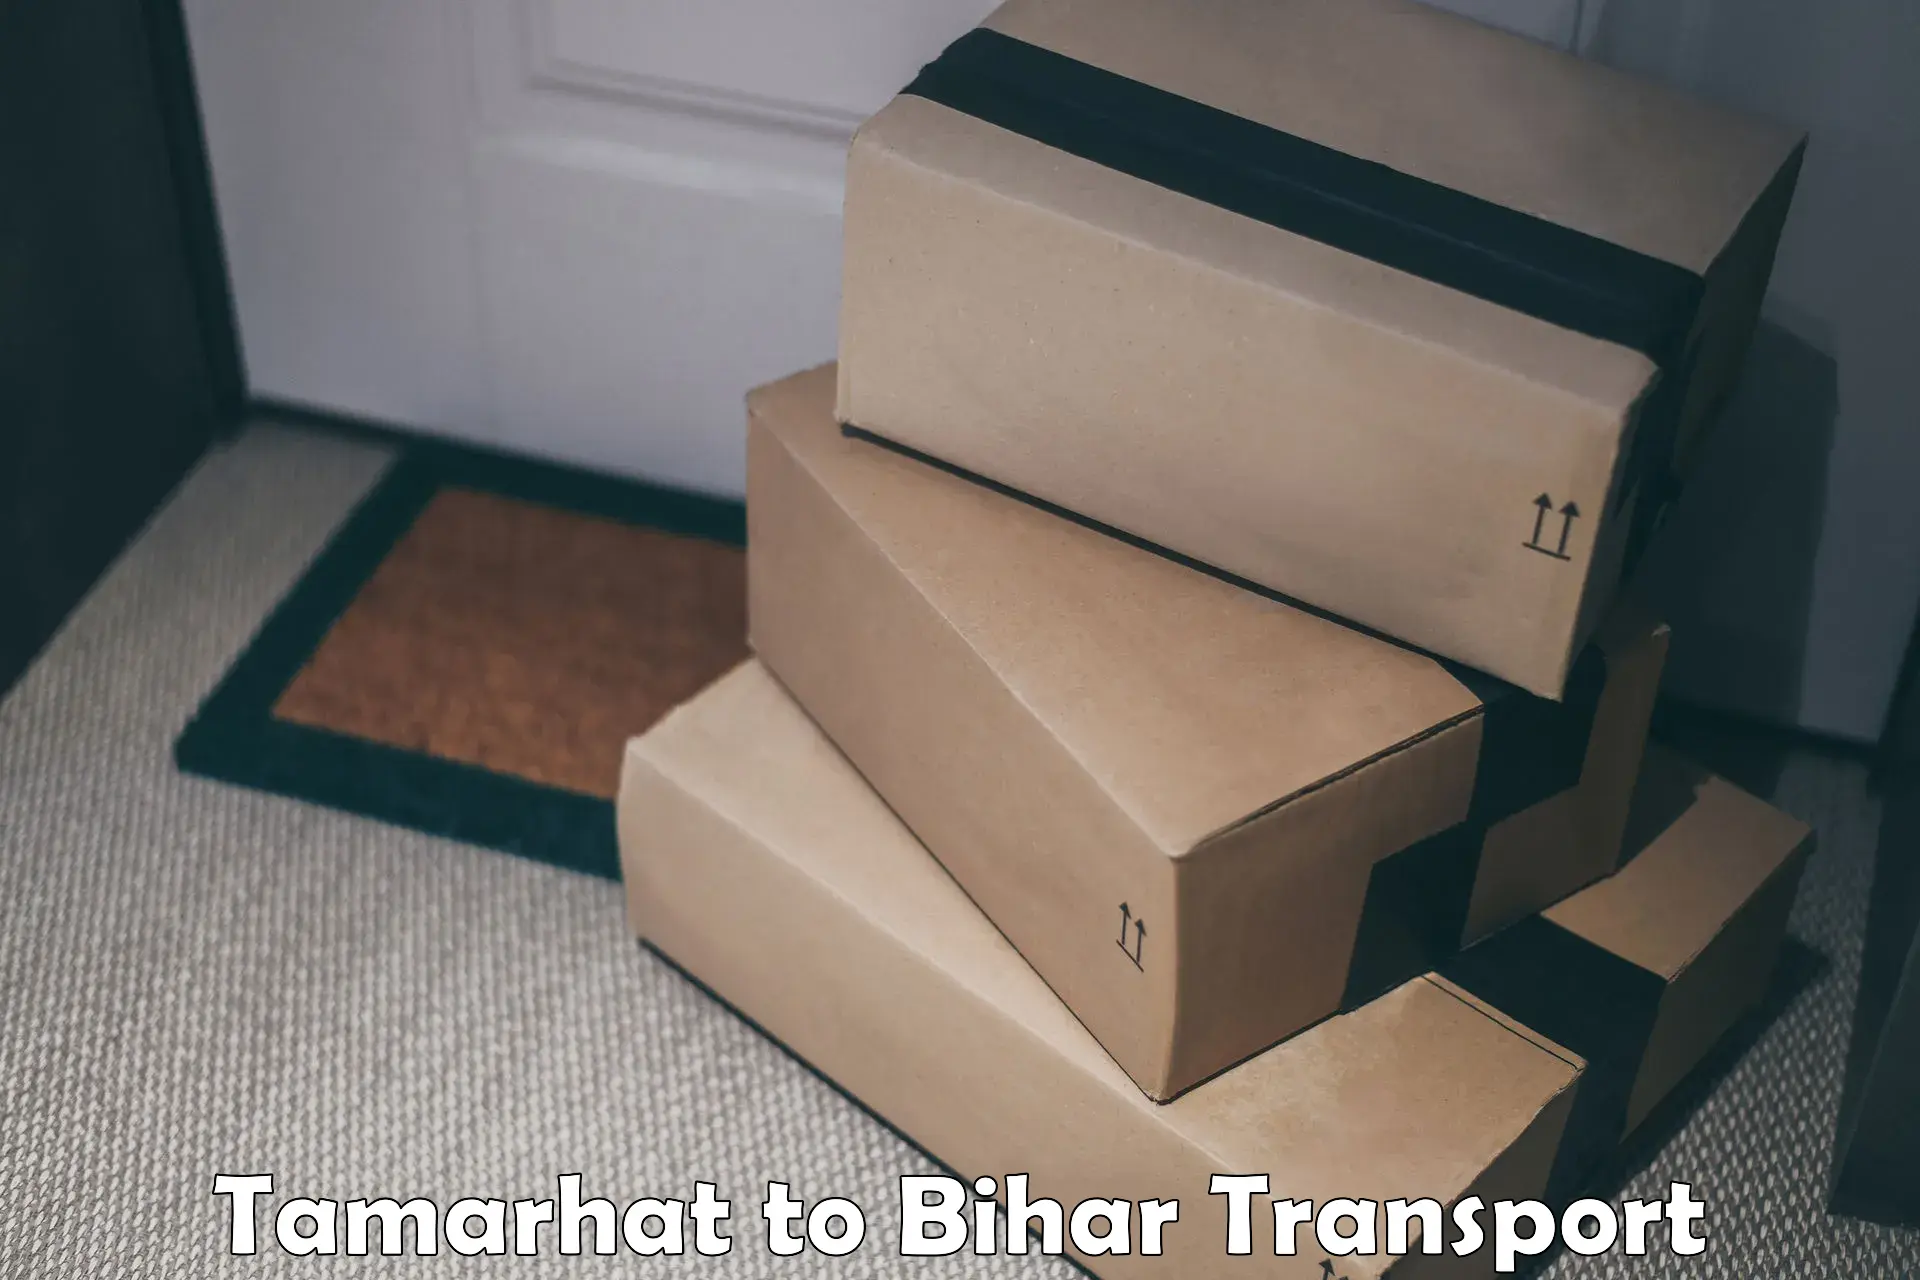 Container transport service Tamarhat to Barh